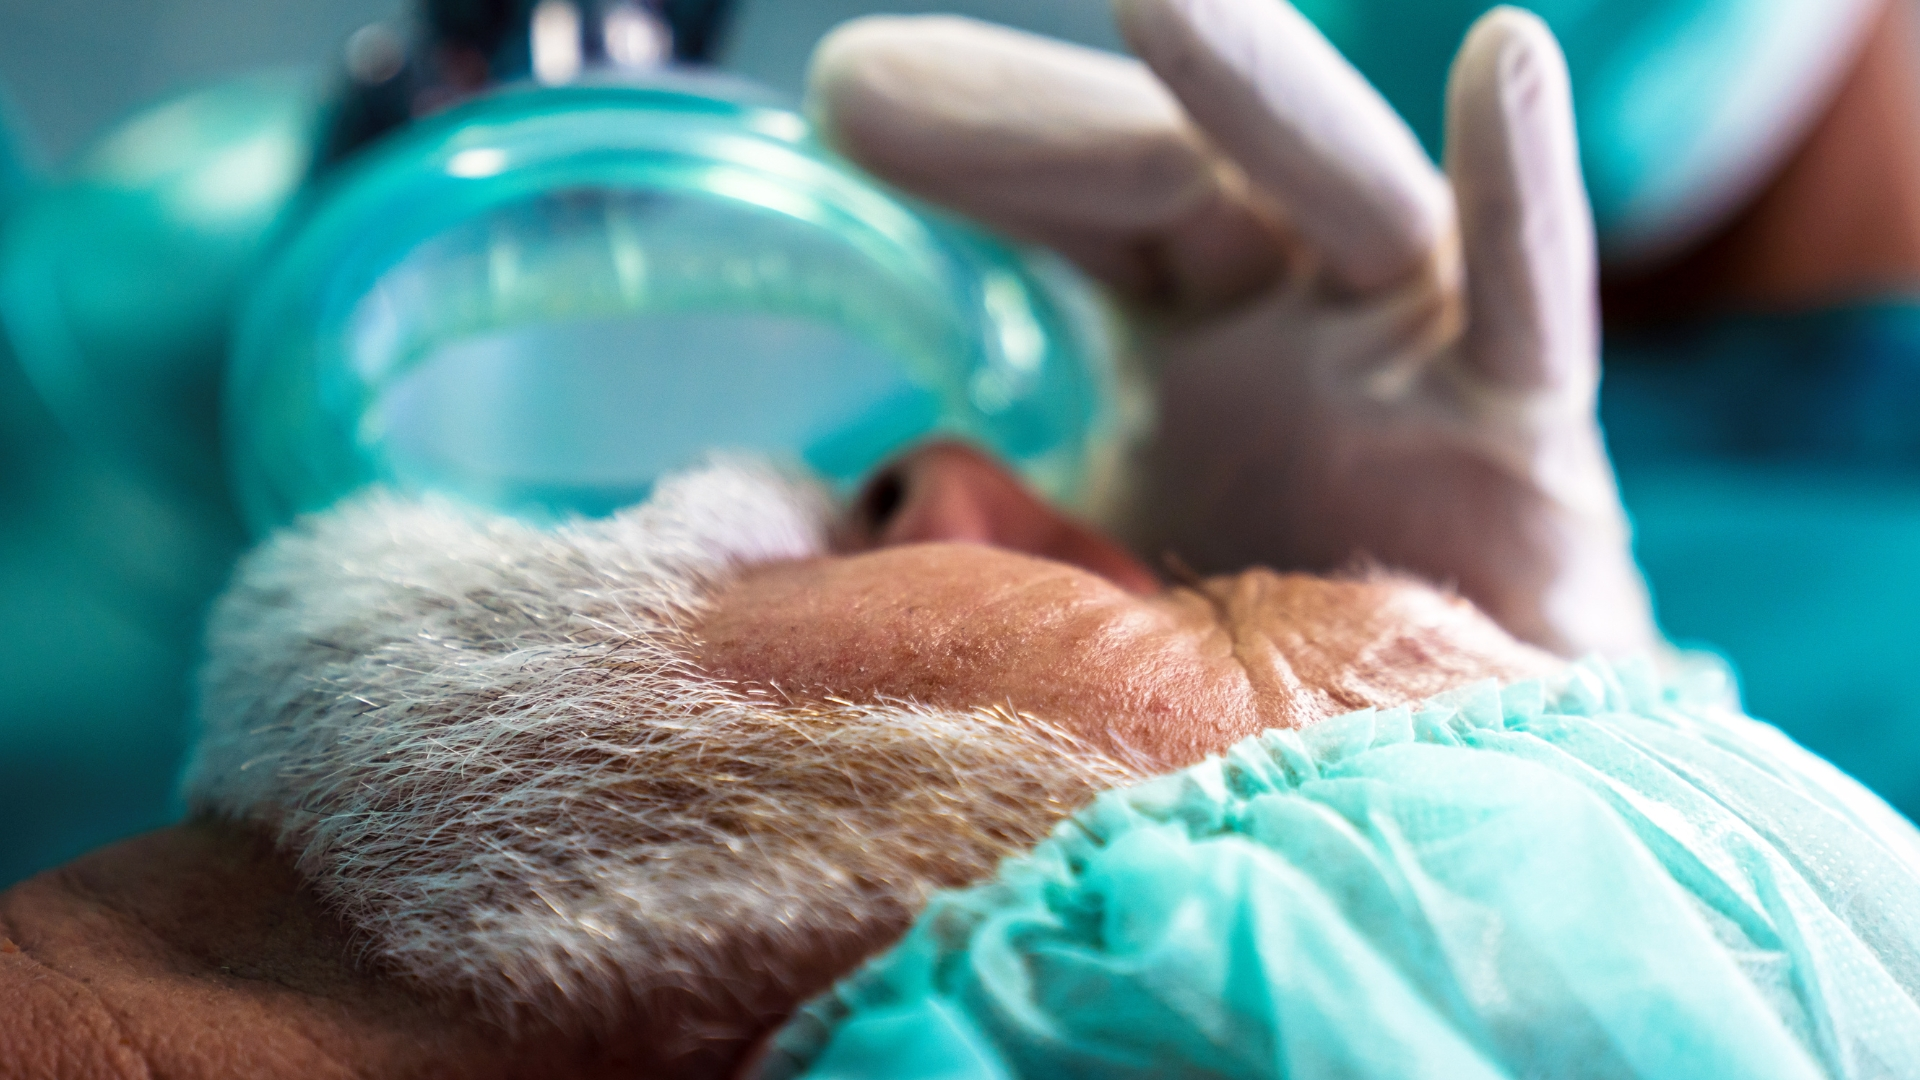 A patient in a general hospital getting anesthesia.